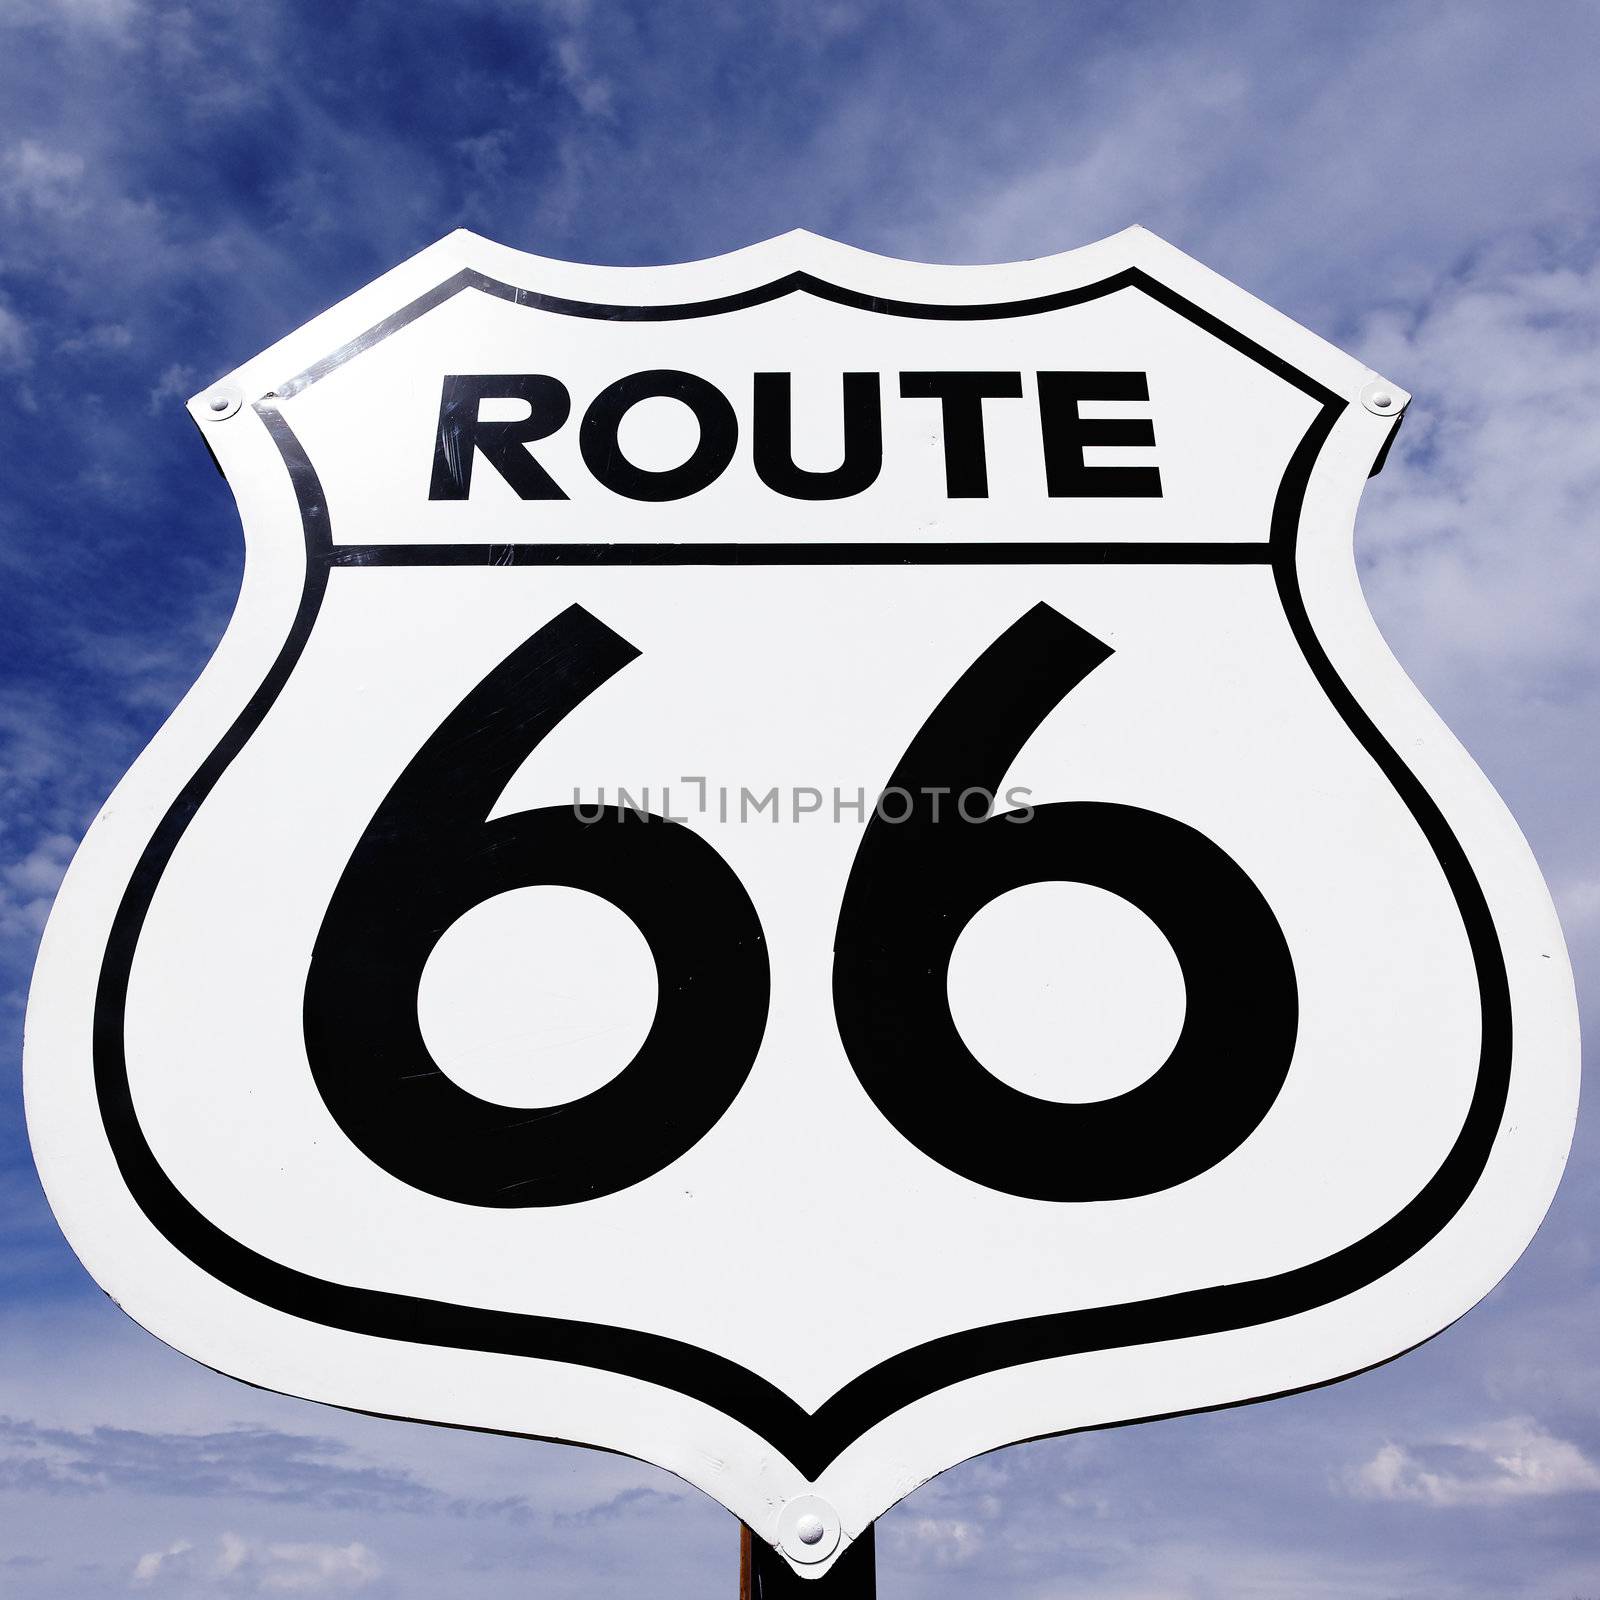 route 66 by vwalakte